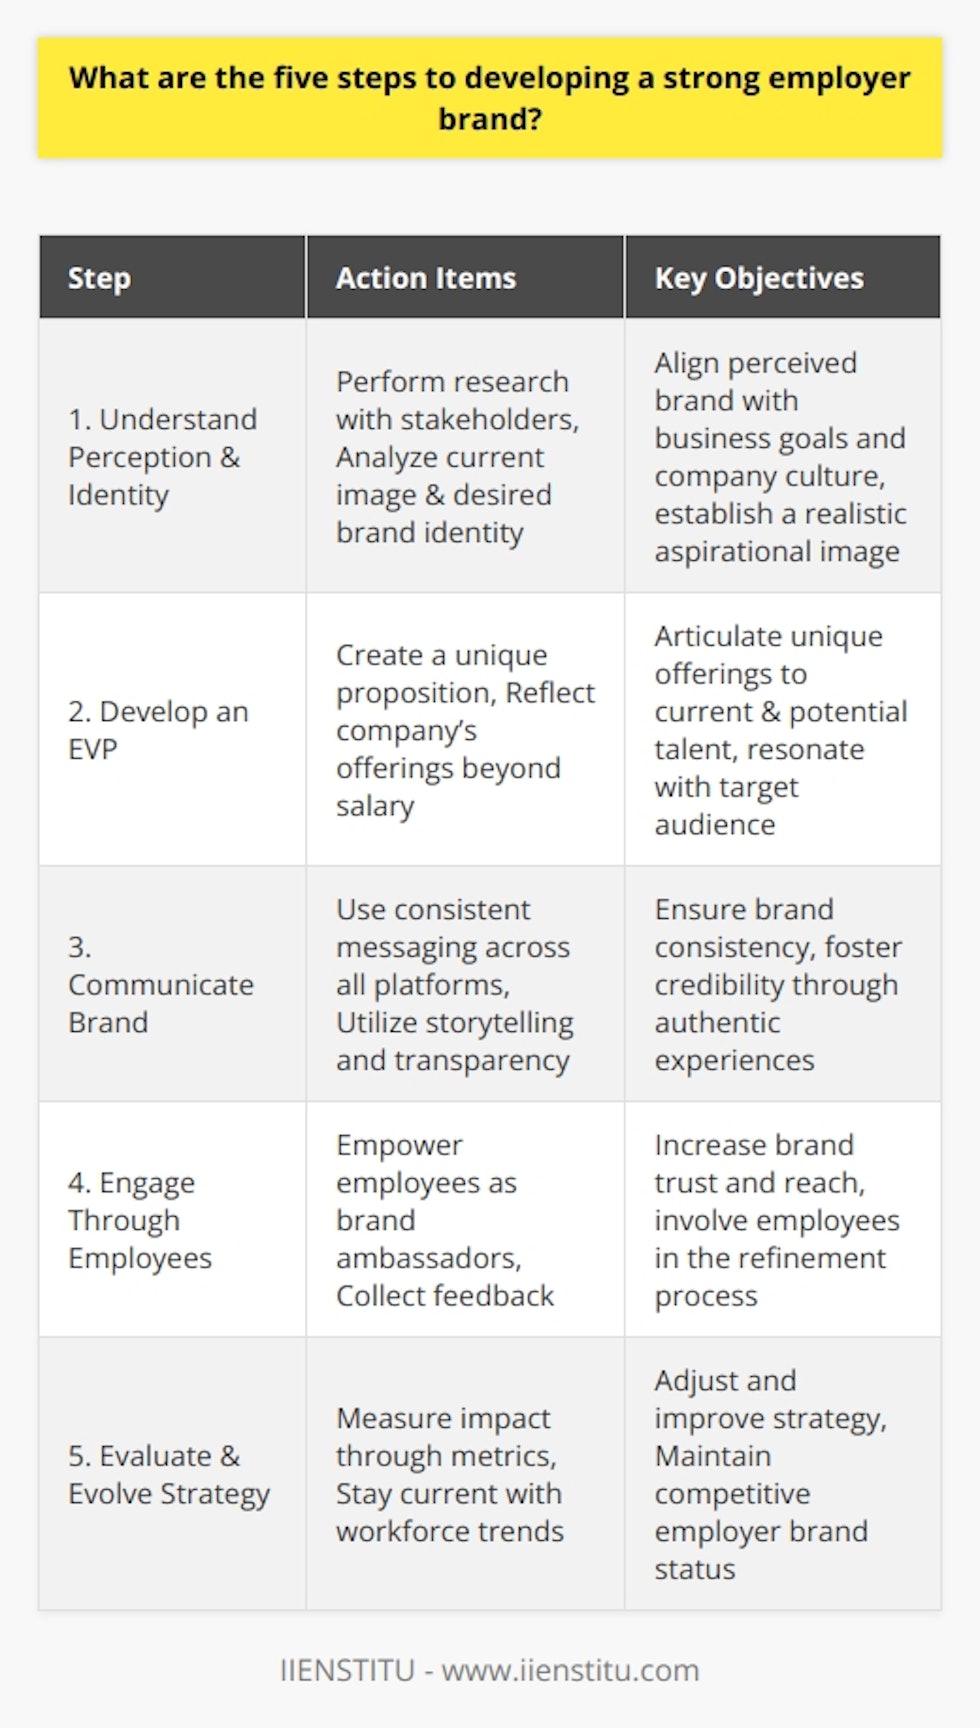 Employer branding has become a critical aspect of talent management and organizational strategy. A strong employer brand helps to attract and retain high-quality employees and positions a company as an employer of choice within the competitive landscape. Here are the five pivotal steps to developing an effective employer brand:**1. Understand the Current Perception and Desired Identity**The first step in building a robust employer brand is to understand the current external perception and the internal identity of the company. This starts with comprehensive research involving current employees, candidates, and other stakeholders to gather insights into what they see as the strengths and weaknesses of the company as an employer. The desired identity is how the company wishes to be perceived. It's essential to articulate this in a realistic and aspirational manner, ensuring that it aligns with the overall business objectives and culture.**2. Develop a Unique Employee Value Proposition (EVP)**Once the current perception and desired identity are understood, the next step is to develop a clear and compelling Employee Value Proposition. An EVP articulates the mix of offerings and values that the company provides in return for the skills, capabilities, and experiences the employees bring to the organization. This proposition must be unique and resonate with current and potential employees, signifying why they should work for the company. This goes beyond salary and benefits, encompassing culture, career development opportunities, work-life balance, and the overall work environment.**3. Communicate the Brand Consistently and Authentically**After crafting a unique EVP, it is vital to communicate this consistently across all platforms and touchpoints, including job postings, career pages, social media, and within the company itself. Authentic storytelling through testimonials, videos, and employee experiences can vividly illustrate life at the company. Being transparent and consistent in the messaging ensures that the brand resonates with the values and experience that the company genuinely offers, strengthening the credibility of the employer brand.**4. Engage and Advocate Through Employees**Employees are the most trustworthy advocates for a company’s employer brand. Encouraging them to share their experiences and stories can amplify the employer brand message. This can be effectively facilitated by creating a culture that empowers employees to be brand ambassadors. Engaging with employees and understanding their perspectives not only fosters a sense of belonging but also provides valuable feedback for refining the employer brand strategy.**5. Evaluate and Evolve the Employer Branding Strategy**The fifth step is to measure the impact of employer branding efforts and make necessary adjustments. Metrics such as hiring metrics, employee turnover rates, and engagement levels can provide insights into the health of the employer brand. Additionally, staying attuned to shifts in workforce dynamics and candidate expectations will help the company adapt and evolve its employer branding strategy to remain competitive.Implementing these five steps effectively can significantly enhance an employer's brand, making it a strategic asset in the battle for talent. It's a continuous journey of discovery, expression, and refinement that requires commitment, creativity, and a clear understanding of what makes the organization unique. With the right approach, a strong employer brand can lead to a more engaged and committed workforce, driving the company's success in today's dynamic job market.